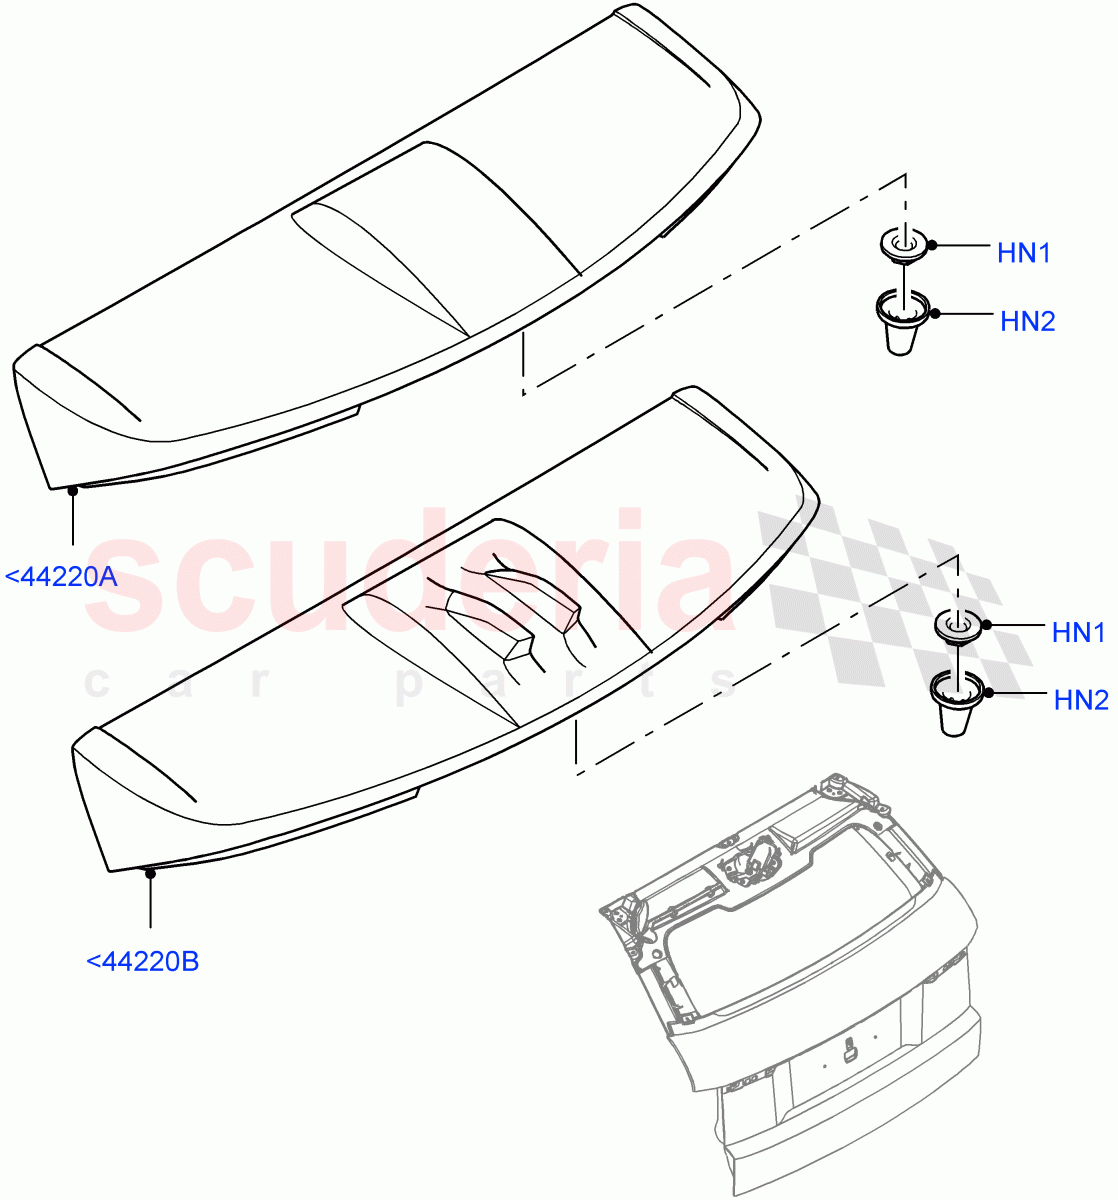 Spoiler And Related Parts(5 Door,Halewood (UK),3 Door)((V)FROMHH000001,(V)TOHH999999) of Land Rover Land Rover Range Rover Evoque (2012-2018) [2.0 Turbo Petrol GTDI]